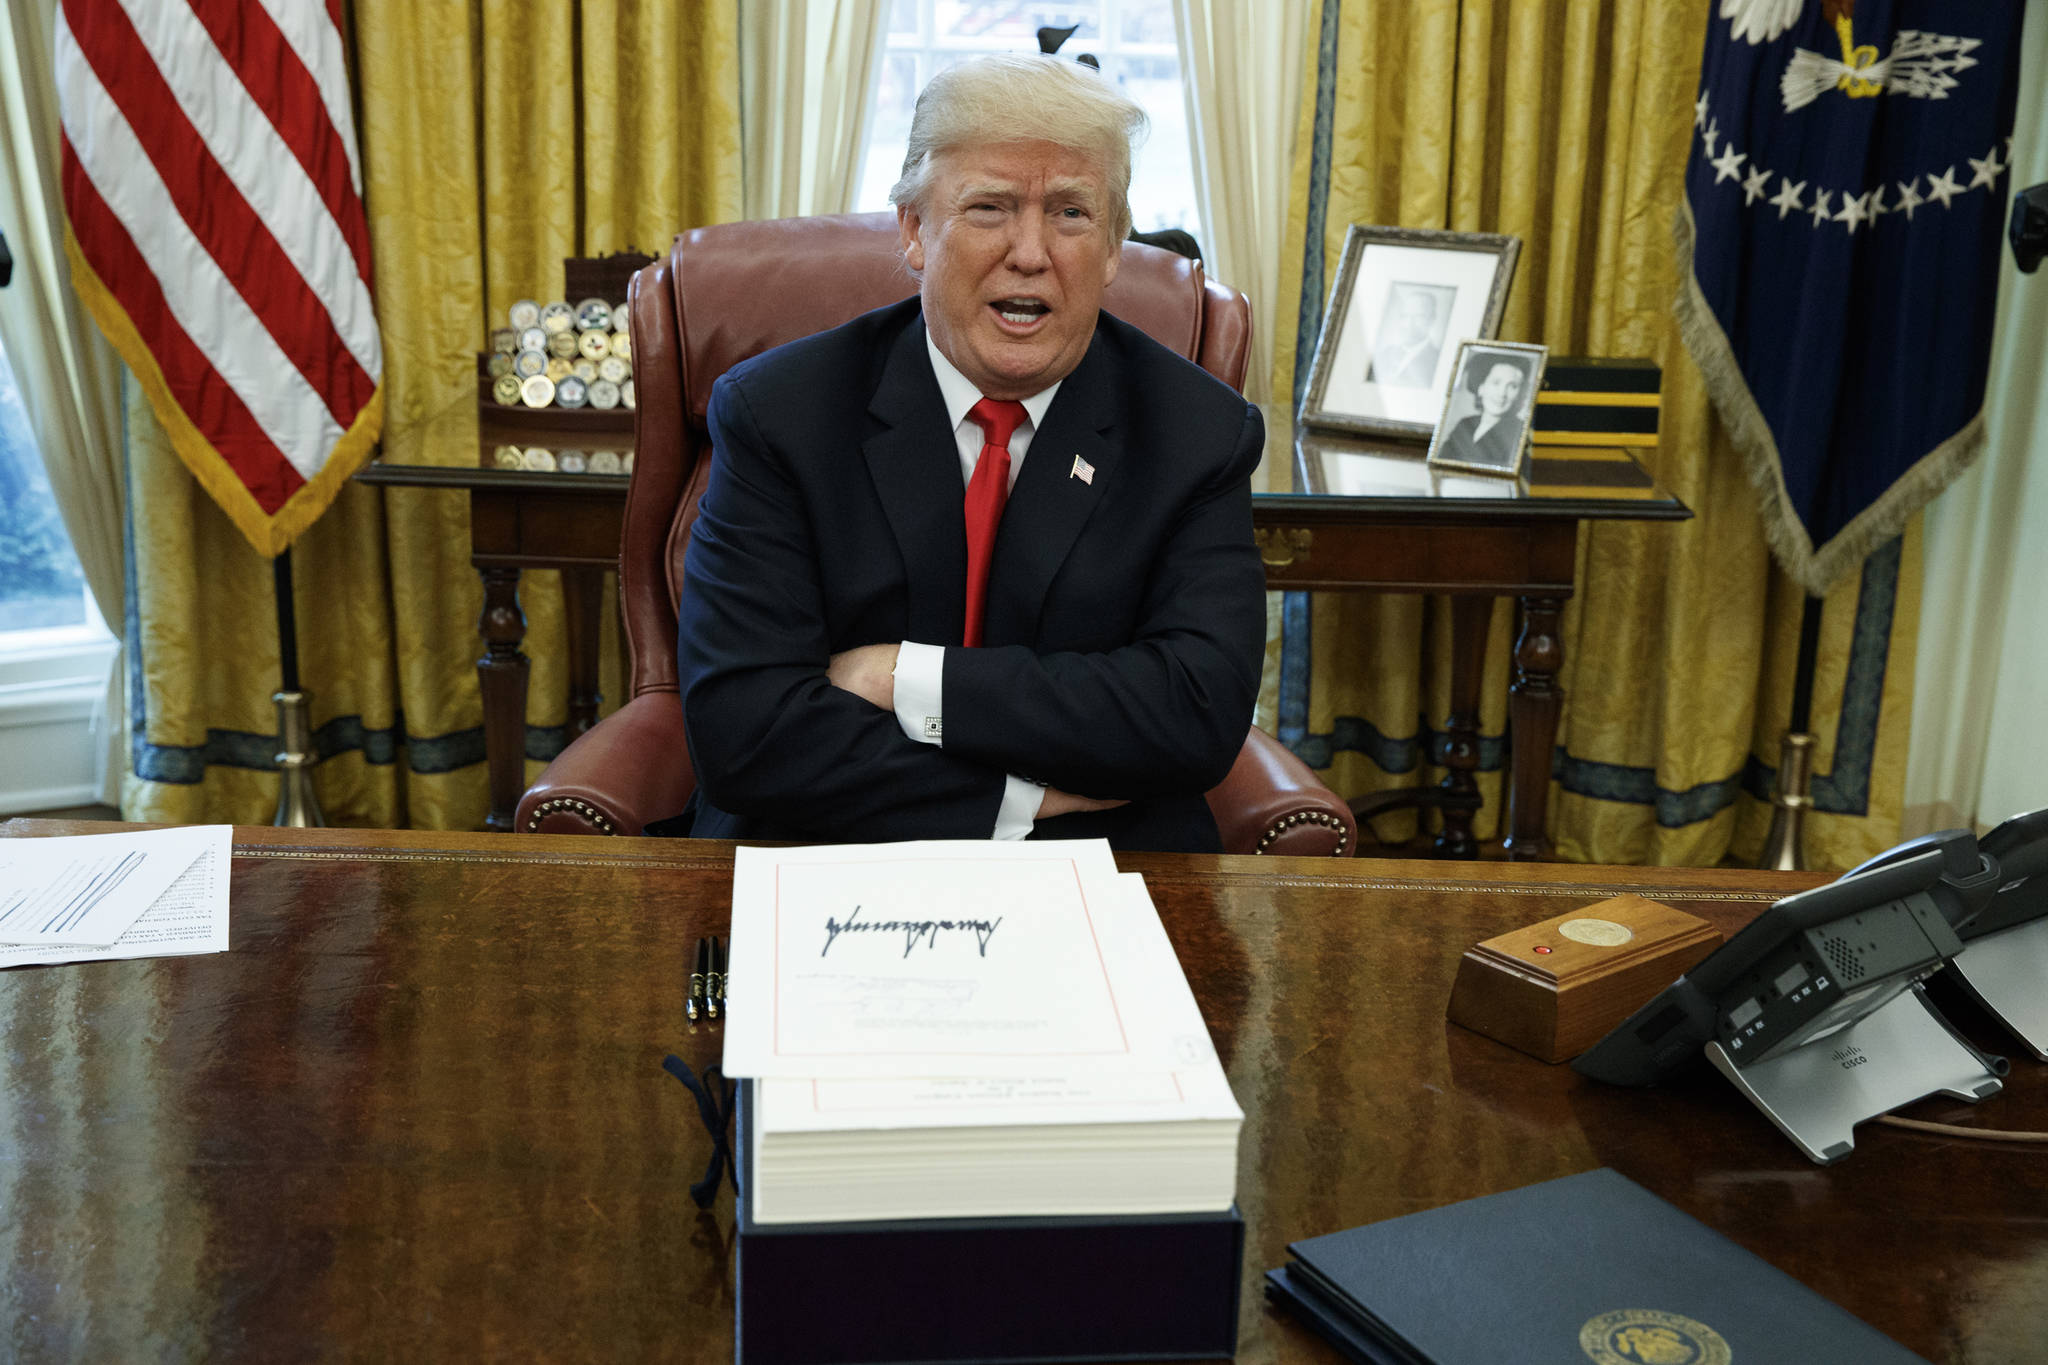 In this Dec. 22, 2017, file photo, President Donald Trump speaks with reporters after signing the tax bill and continuing resolution to fund the government, in the Oval Office of the White House in Washington. On Friday, the president signed two bills by Rep. Don Young, R-Alaska. (AP Photo/Evan Vucci, File)